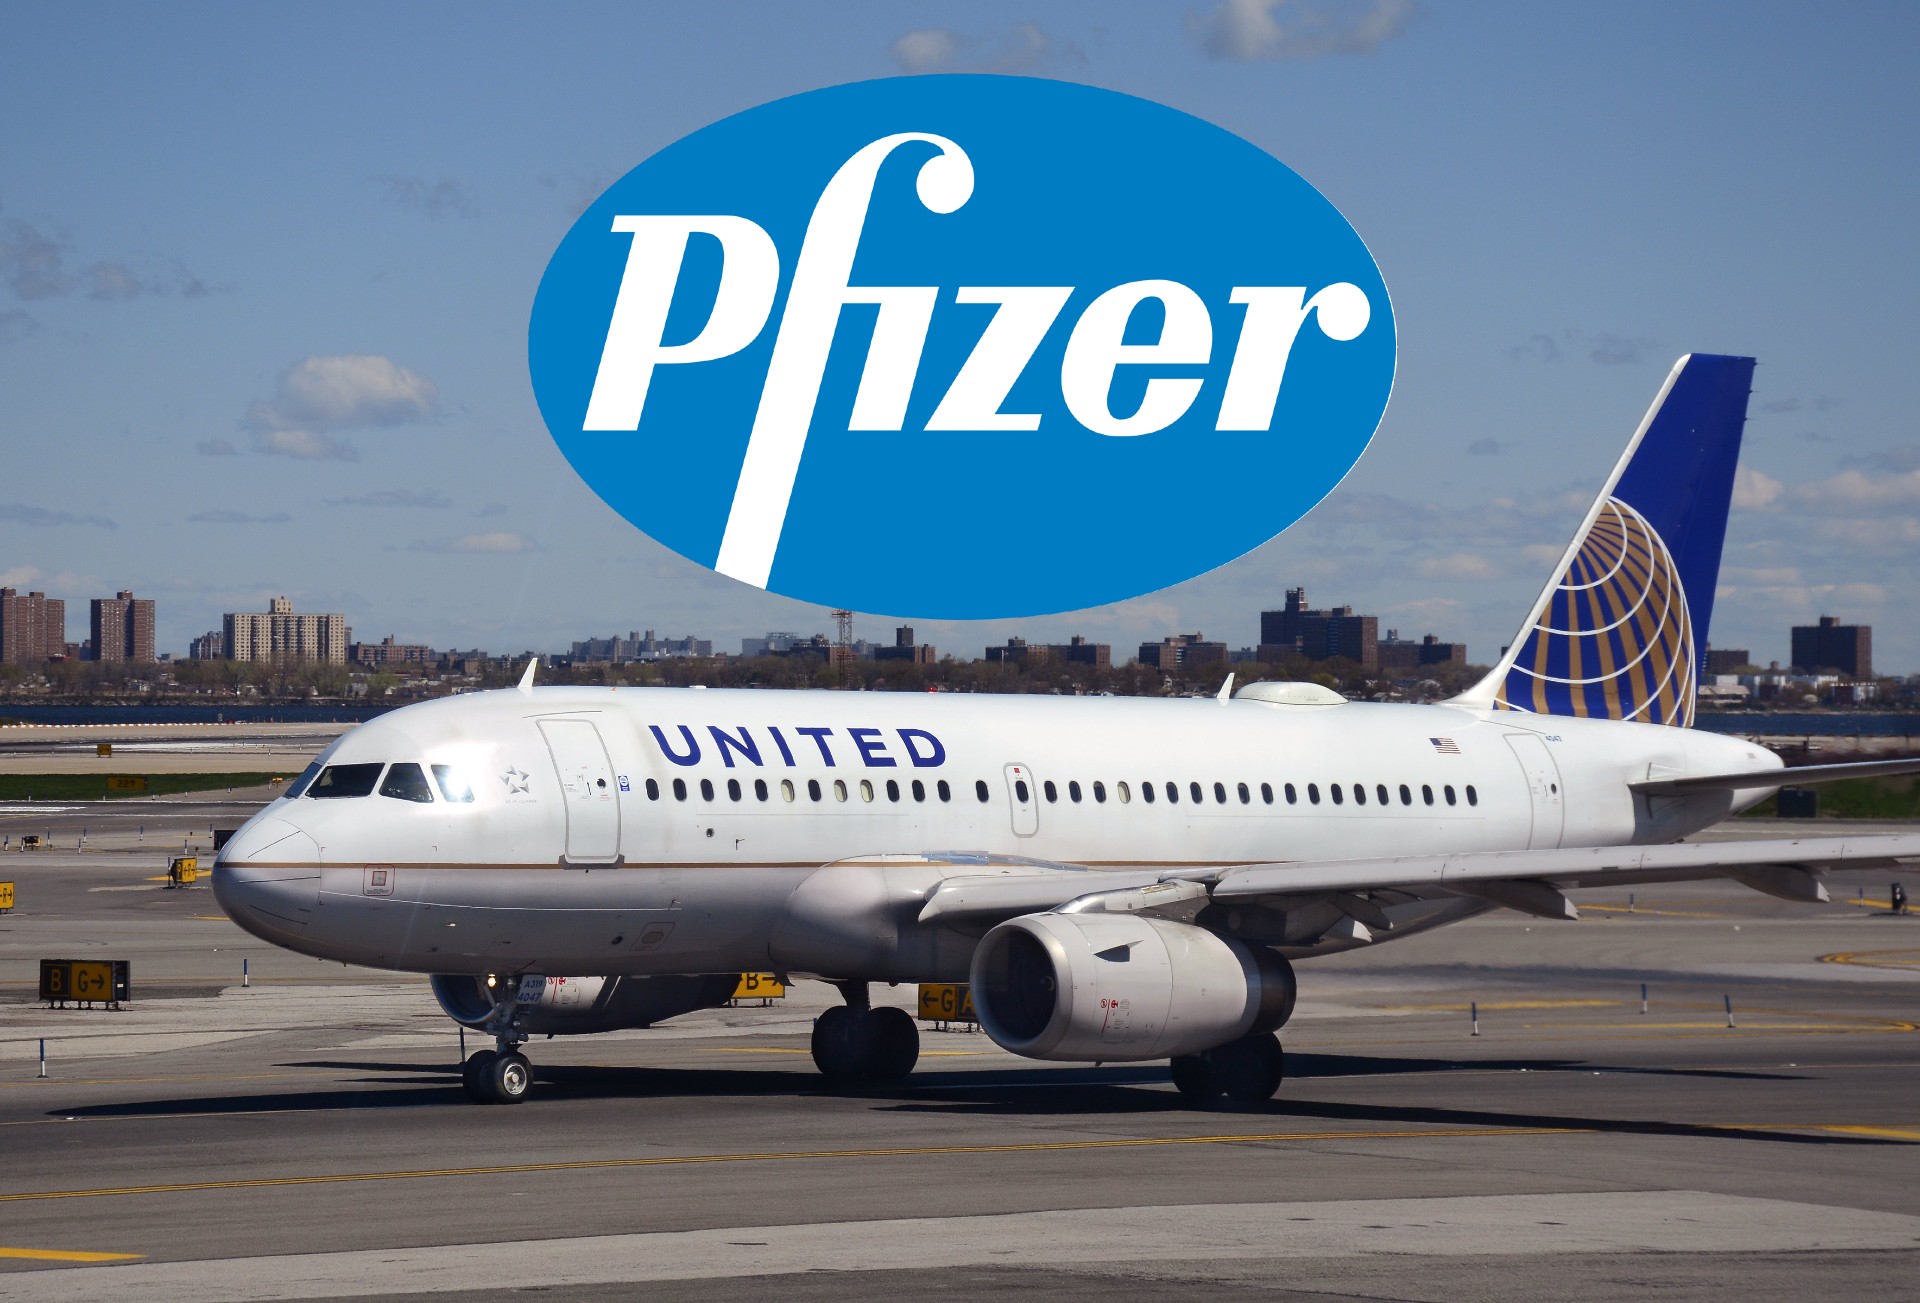 United Airlines Pfizer